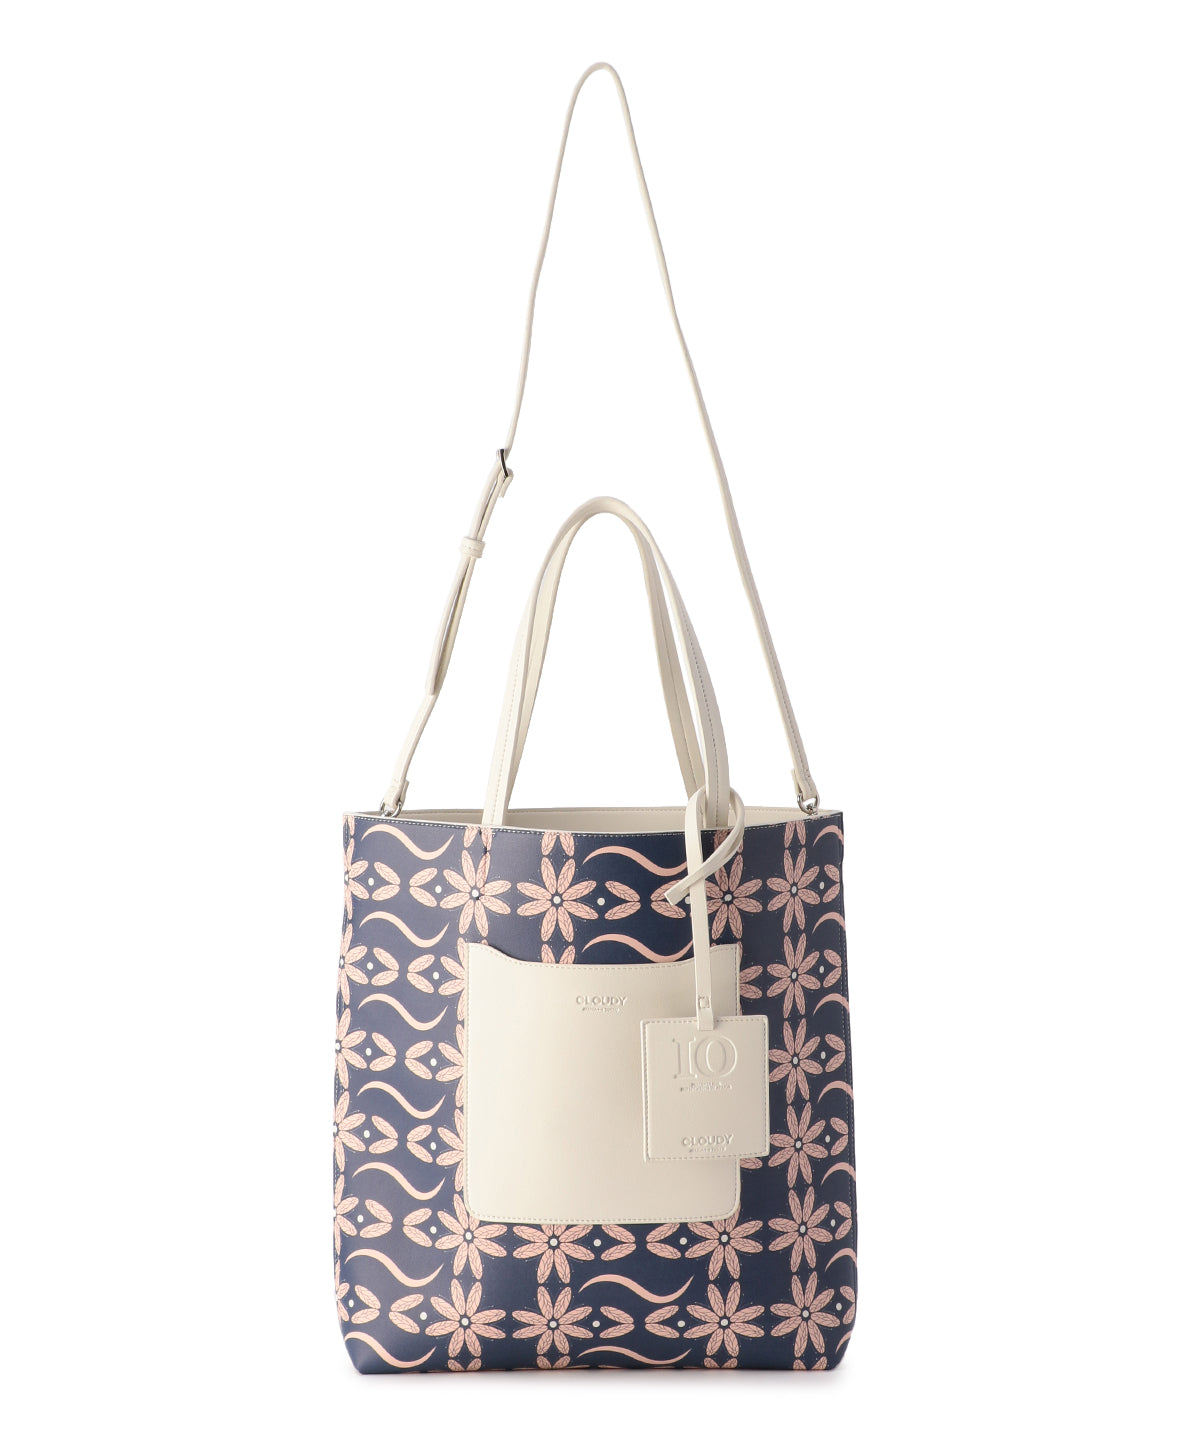 Fake Leather Printed Tote Bag (Large) WHITE | バッグ | CLOUDY公式通販サイト